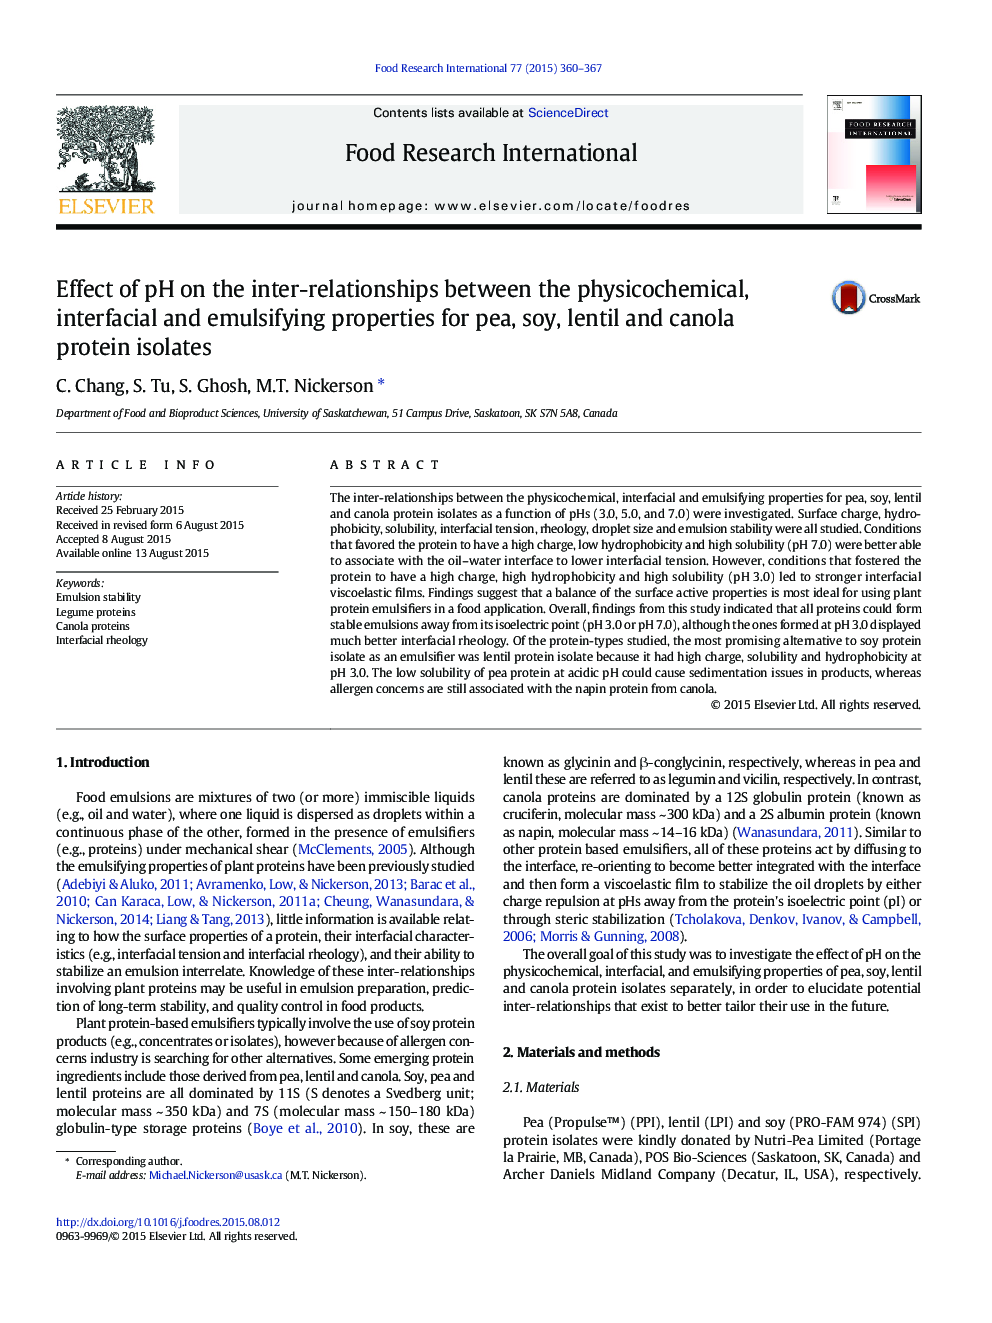 Effect of pH on the inter-relationships between the physicochemical, interfacial and emulsifying properties for pea, soy, lentil and canola protein isolates